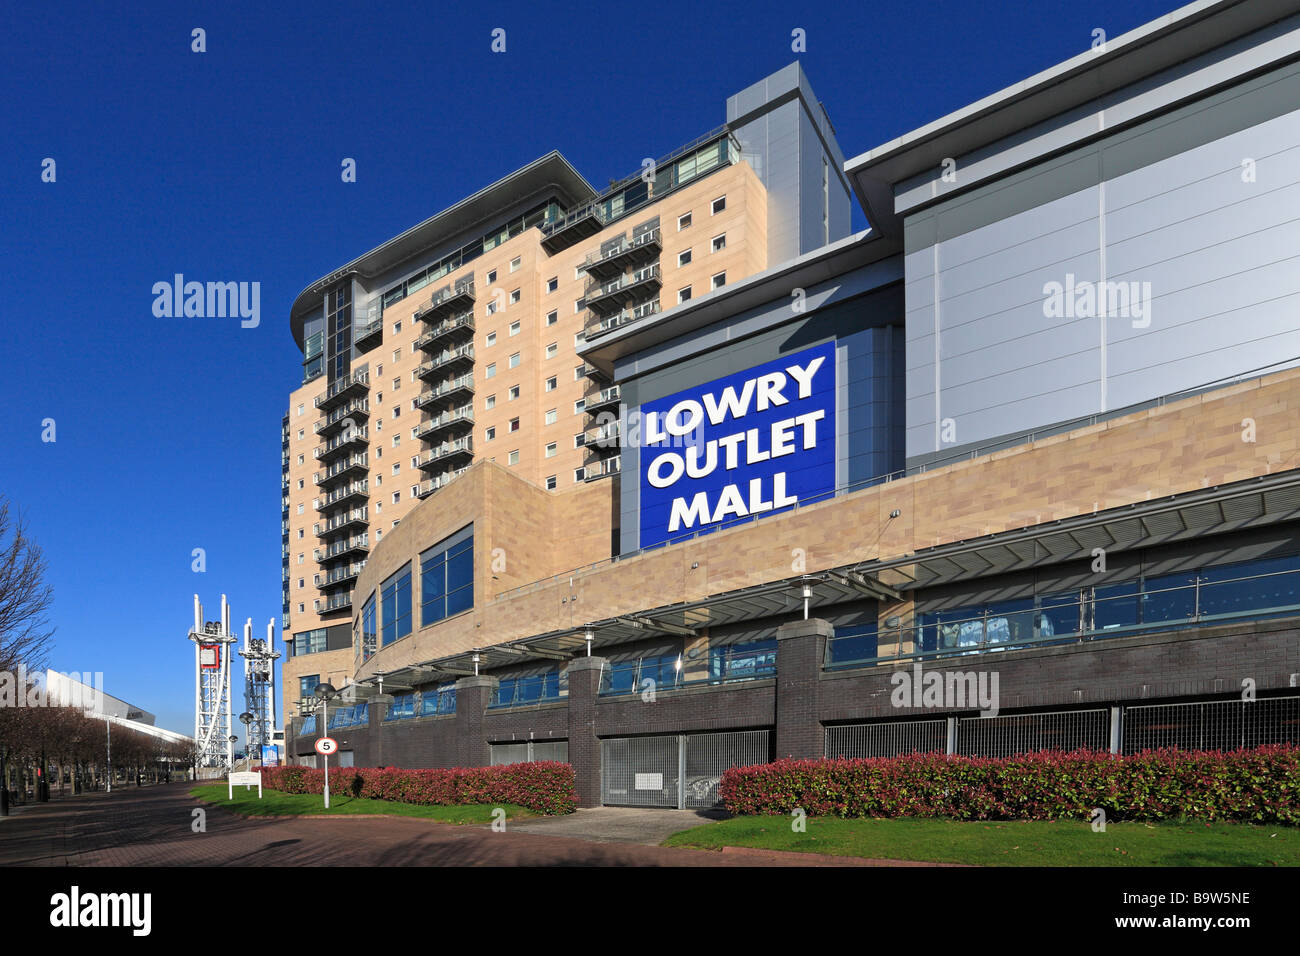 Lowry Outlet Mall, Salford Quays, Manchester, Lancashire, England, UK. Stock Photo